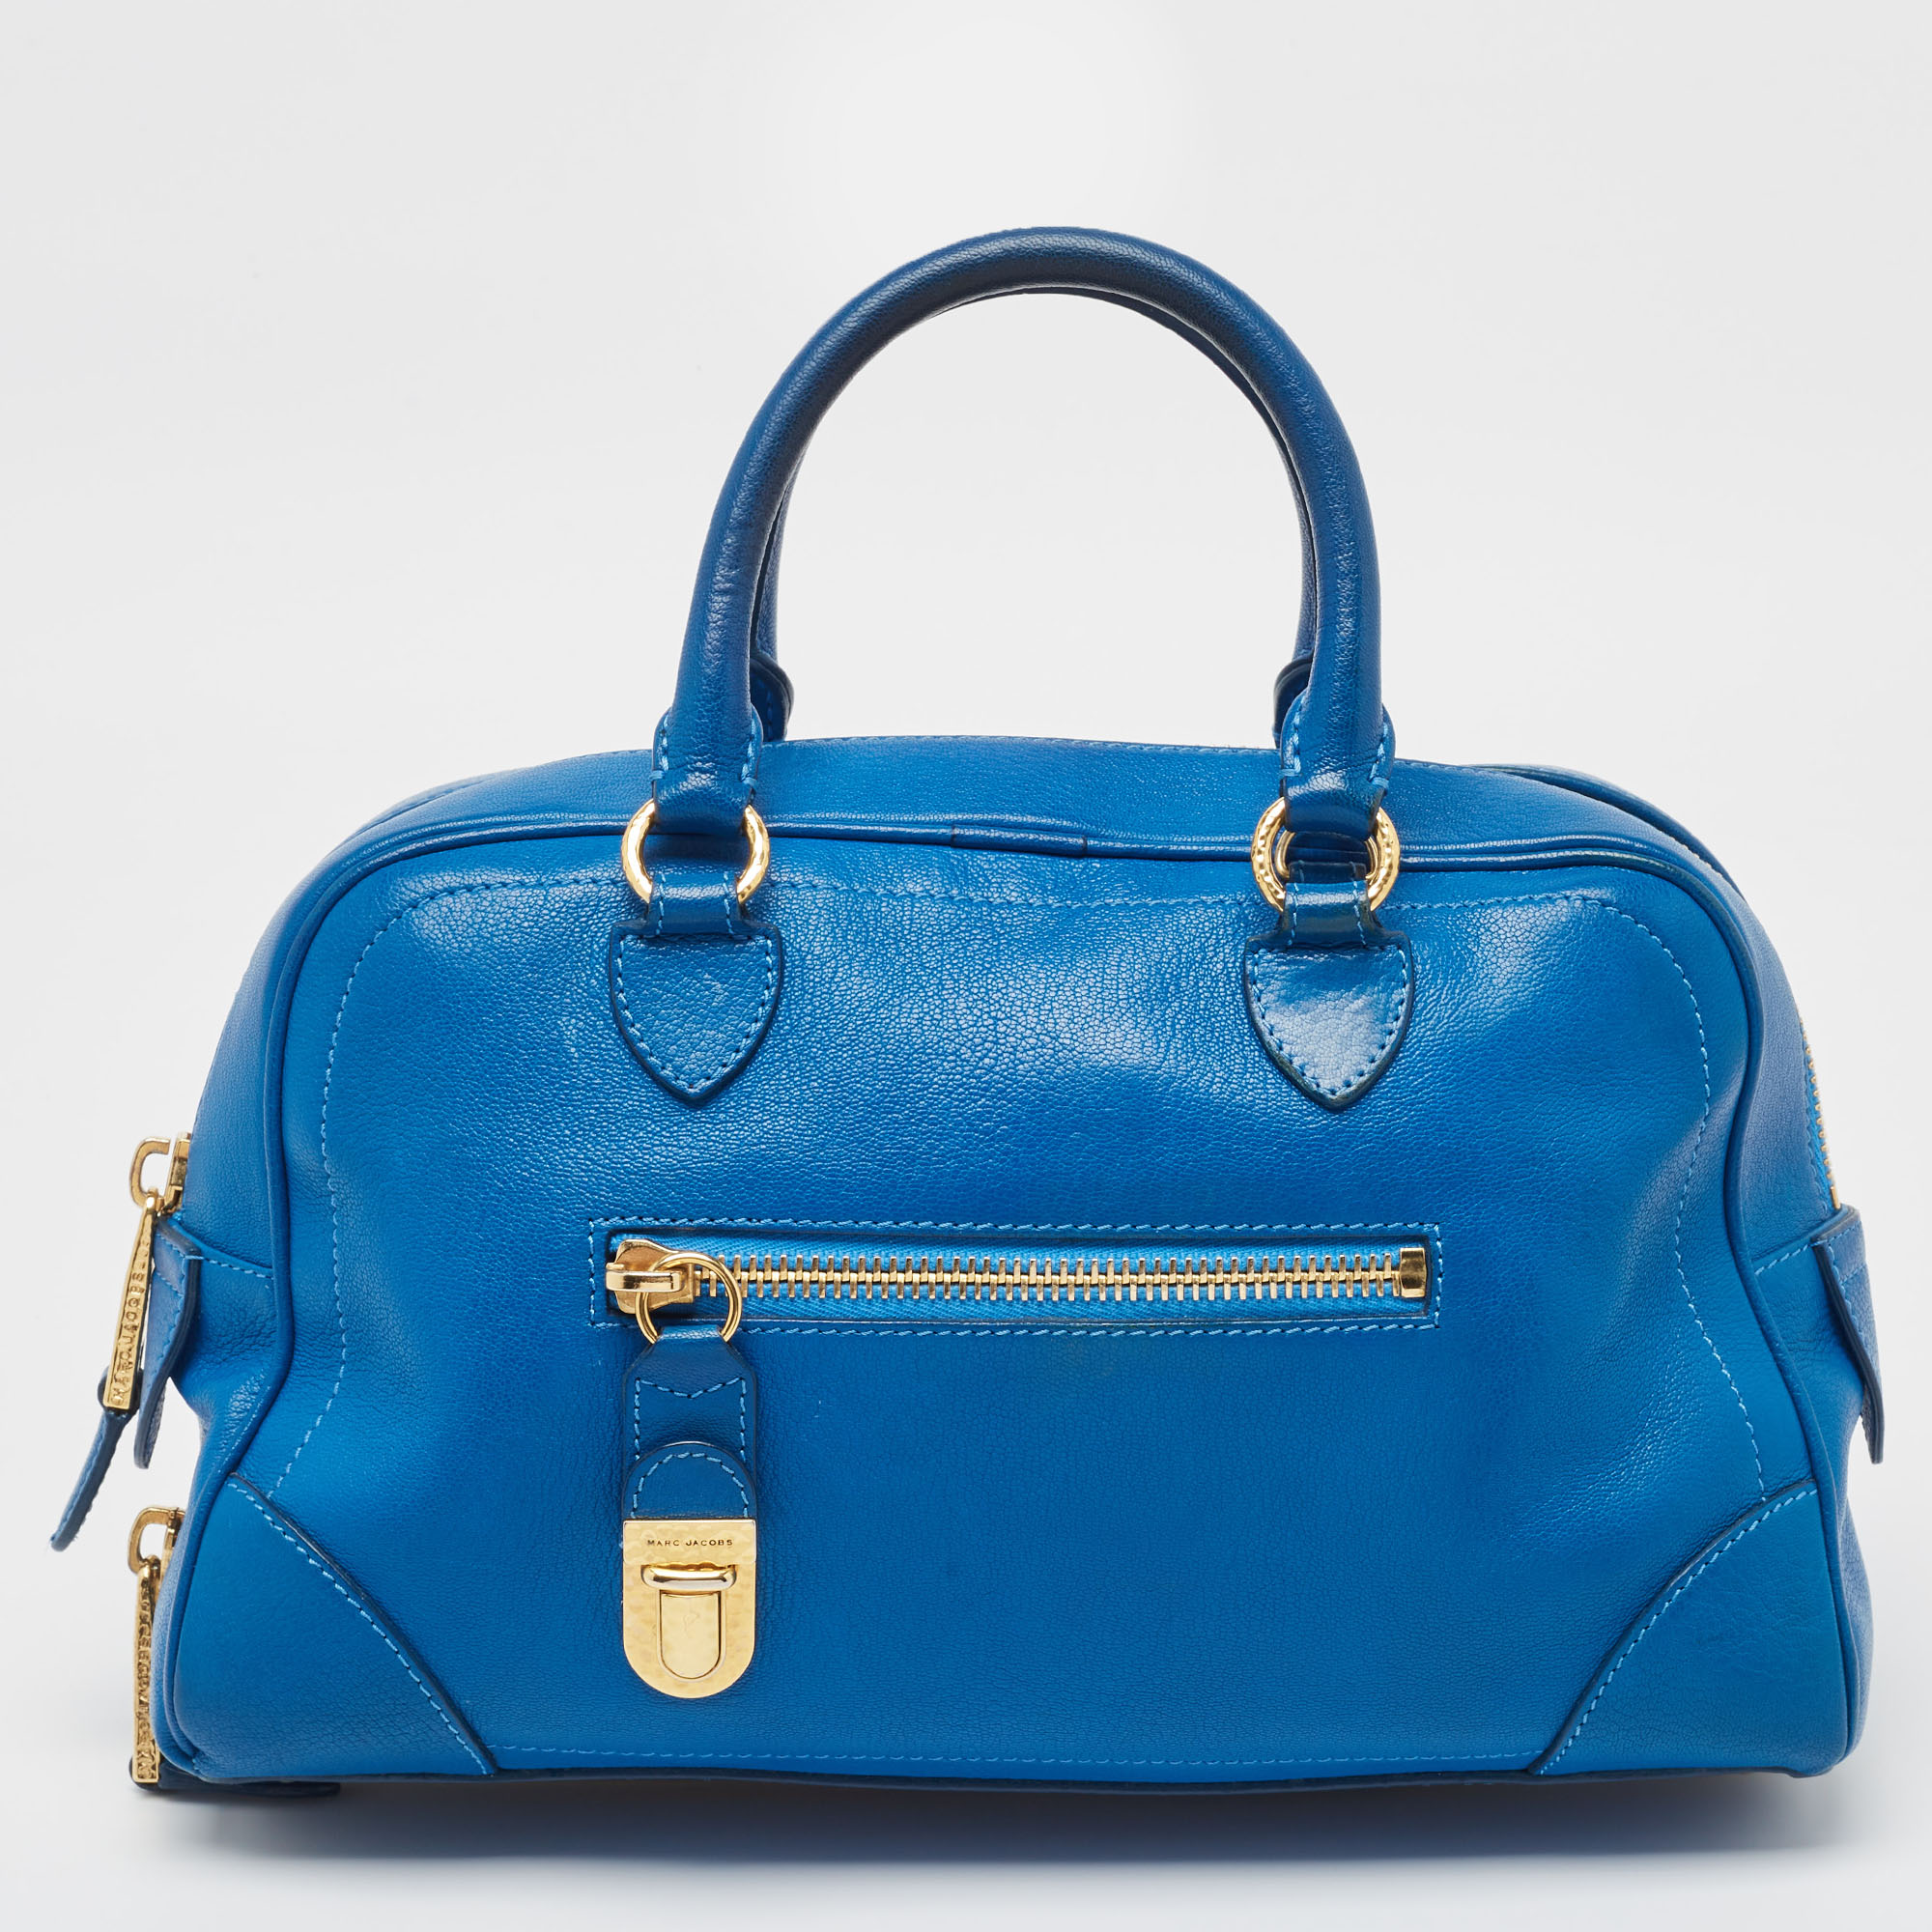 Pre-owned Marc Jacobs Blue Leather The Venetia Satchel